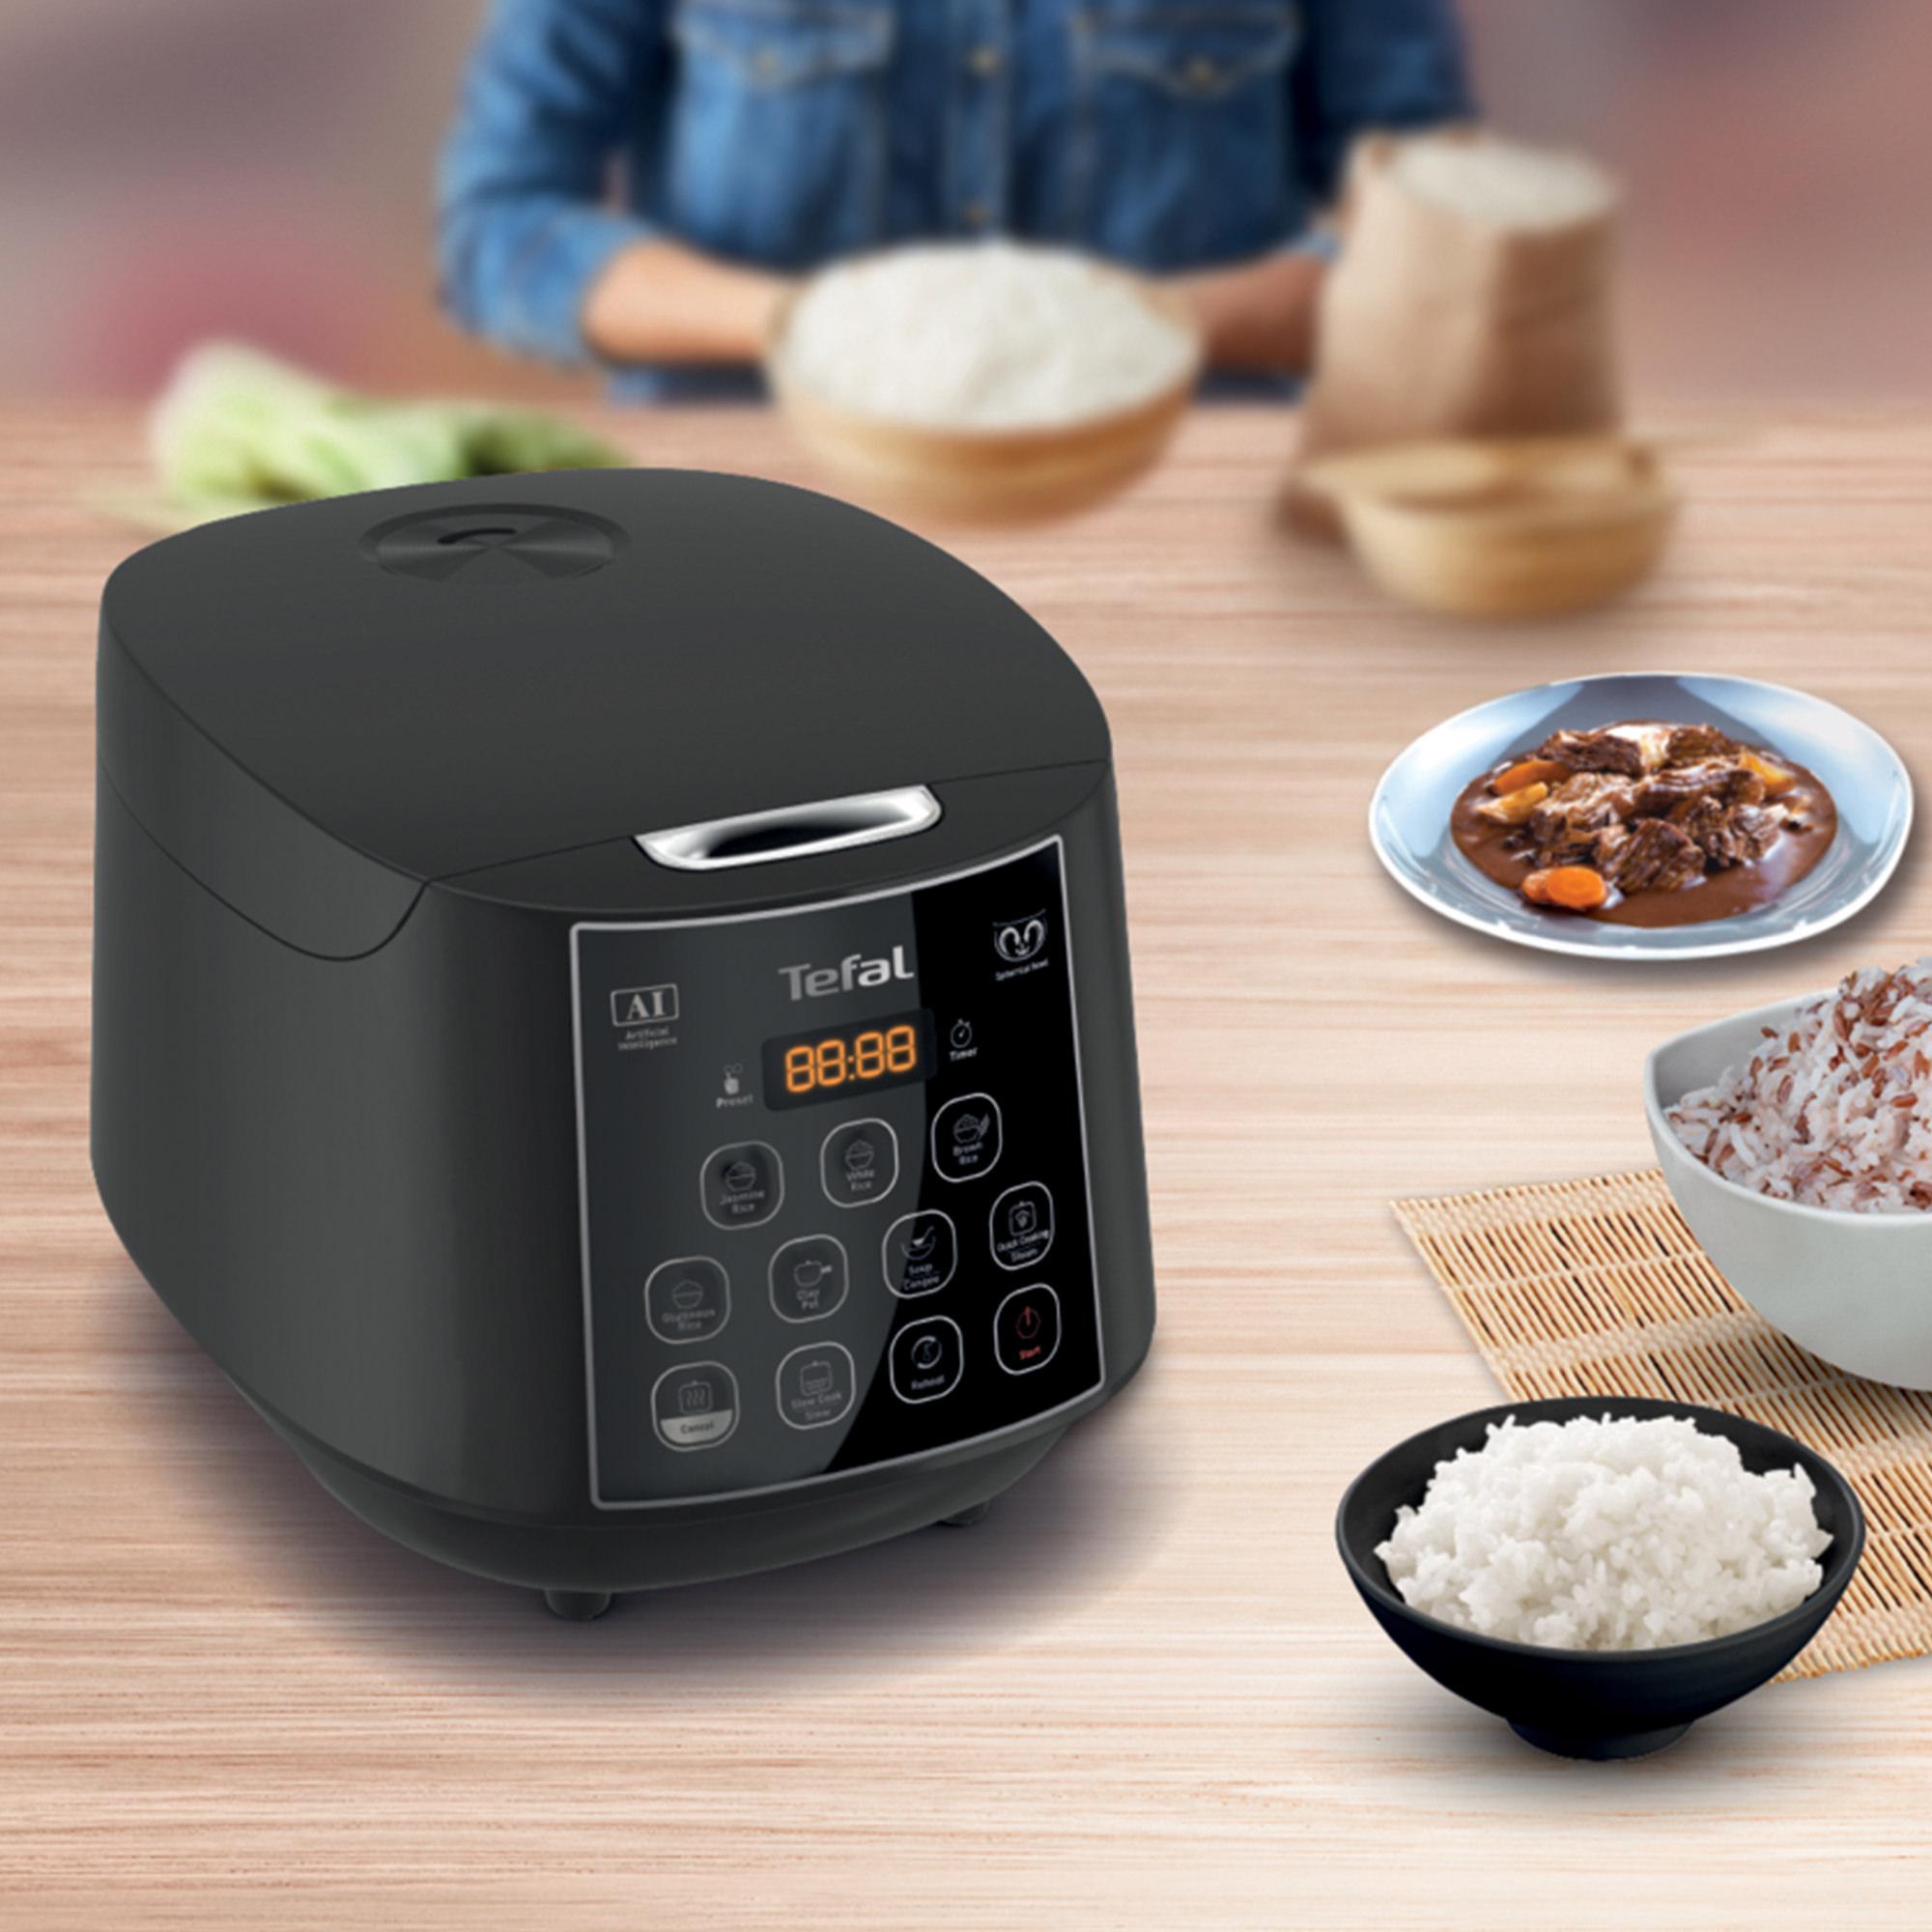 Tefal Easy RK736 Rice and Slow Cooker Plus 1.8L Black Image 6